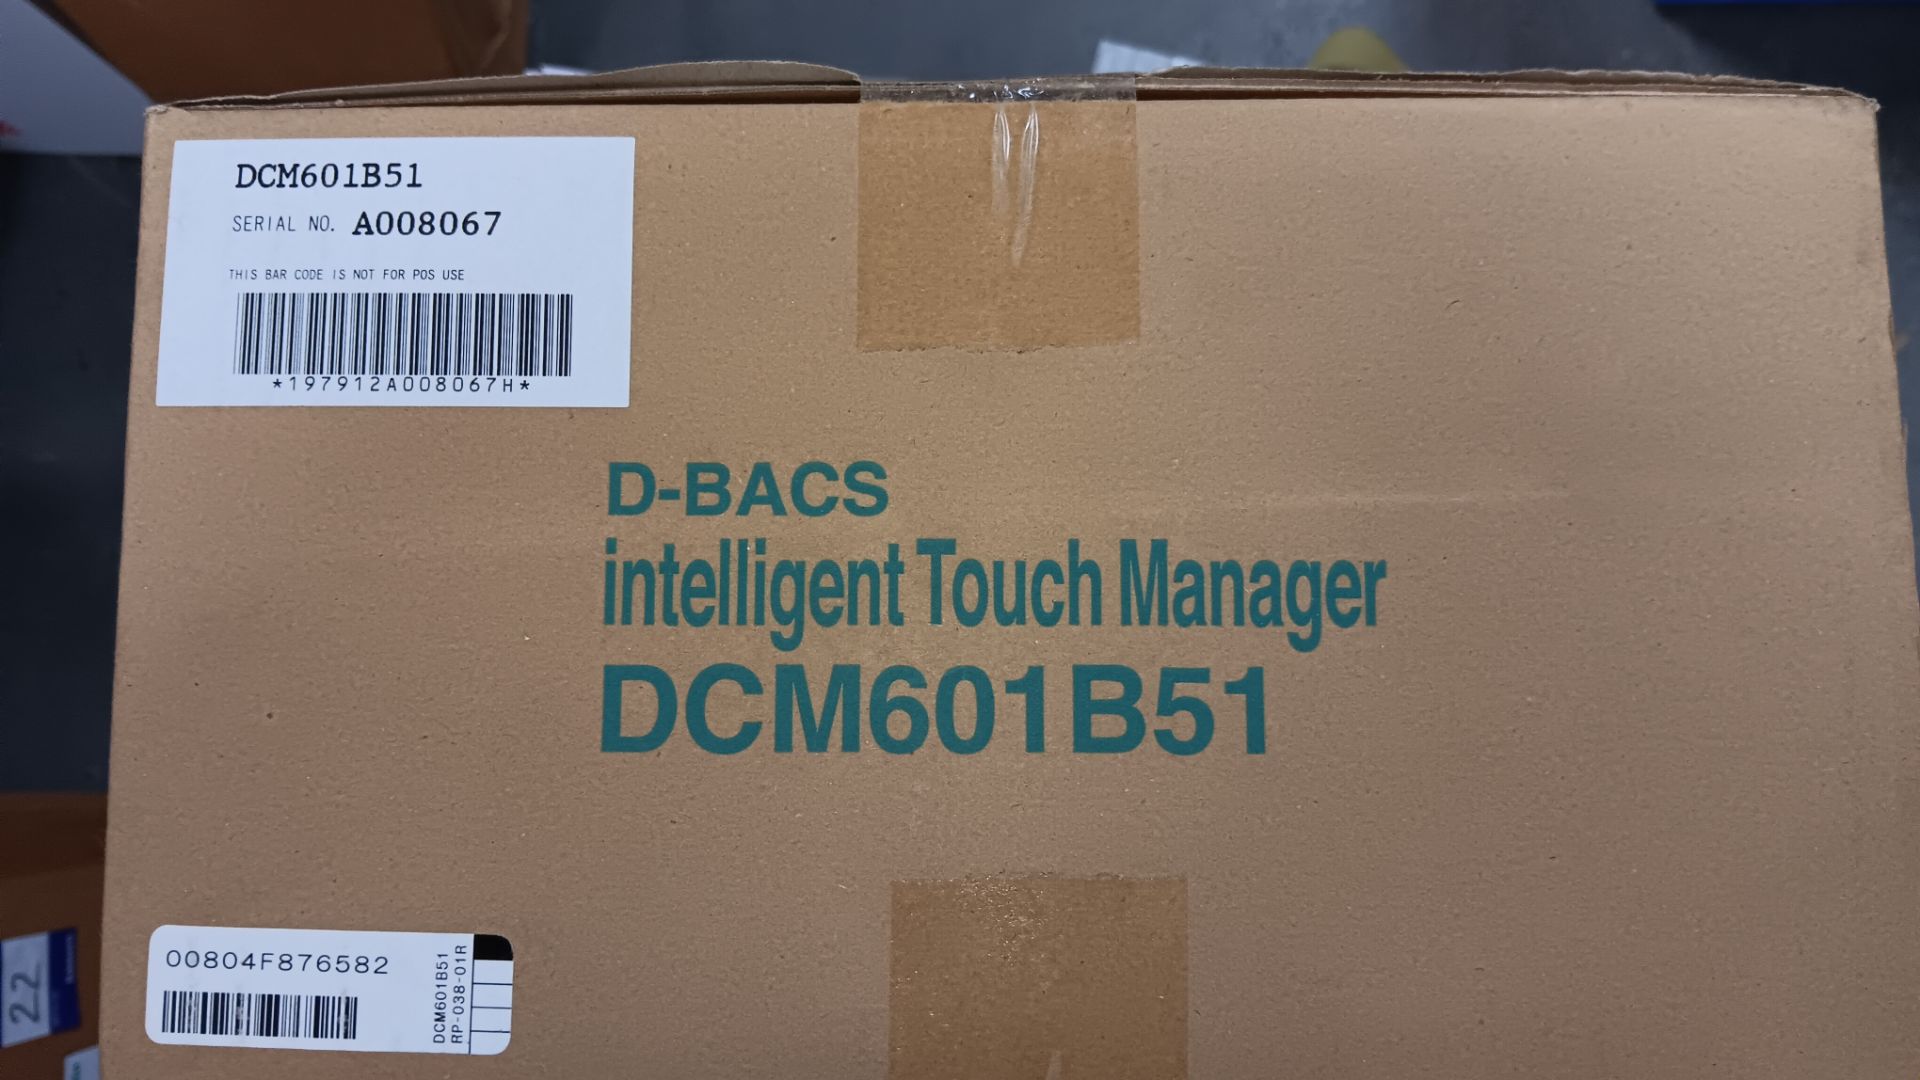 Daikin Intelligent Touch Manager DCM601B51 Centralised Controller, Serial number A008067 - Image 2 of 2